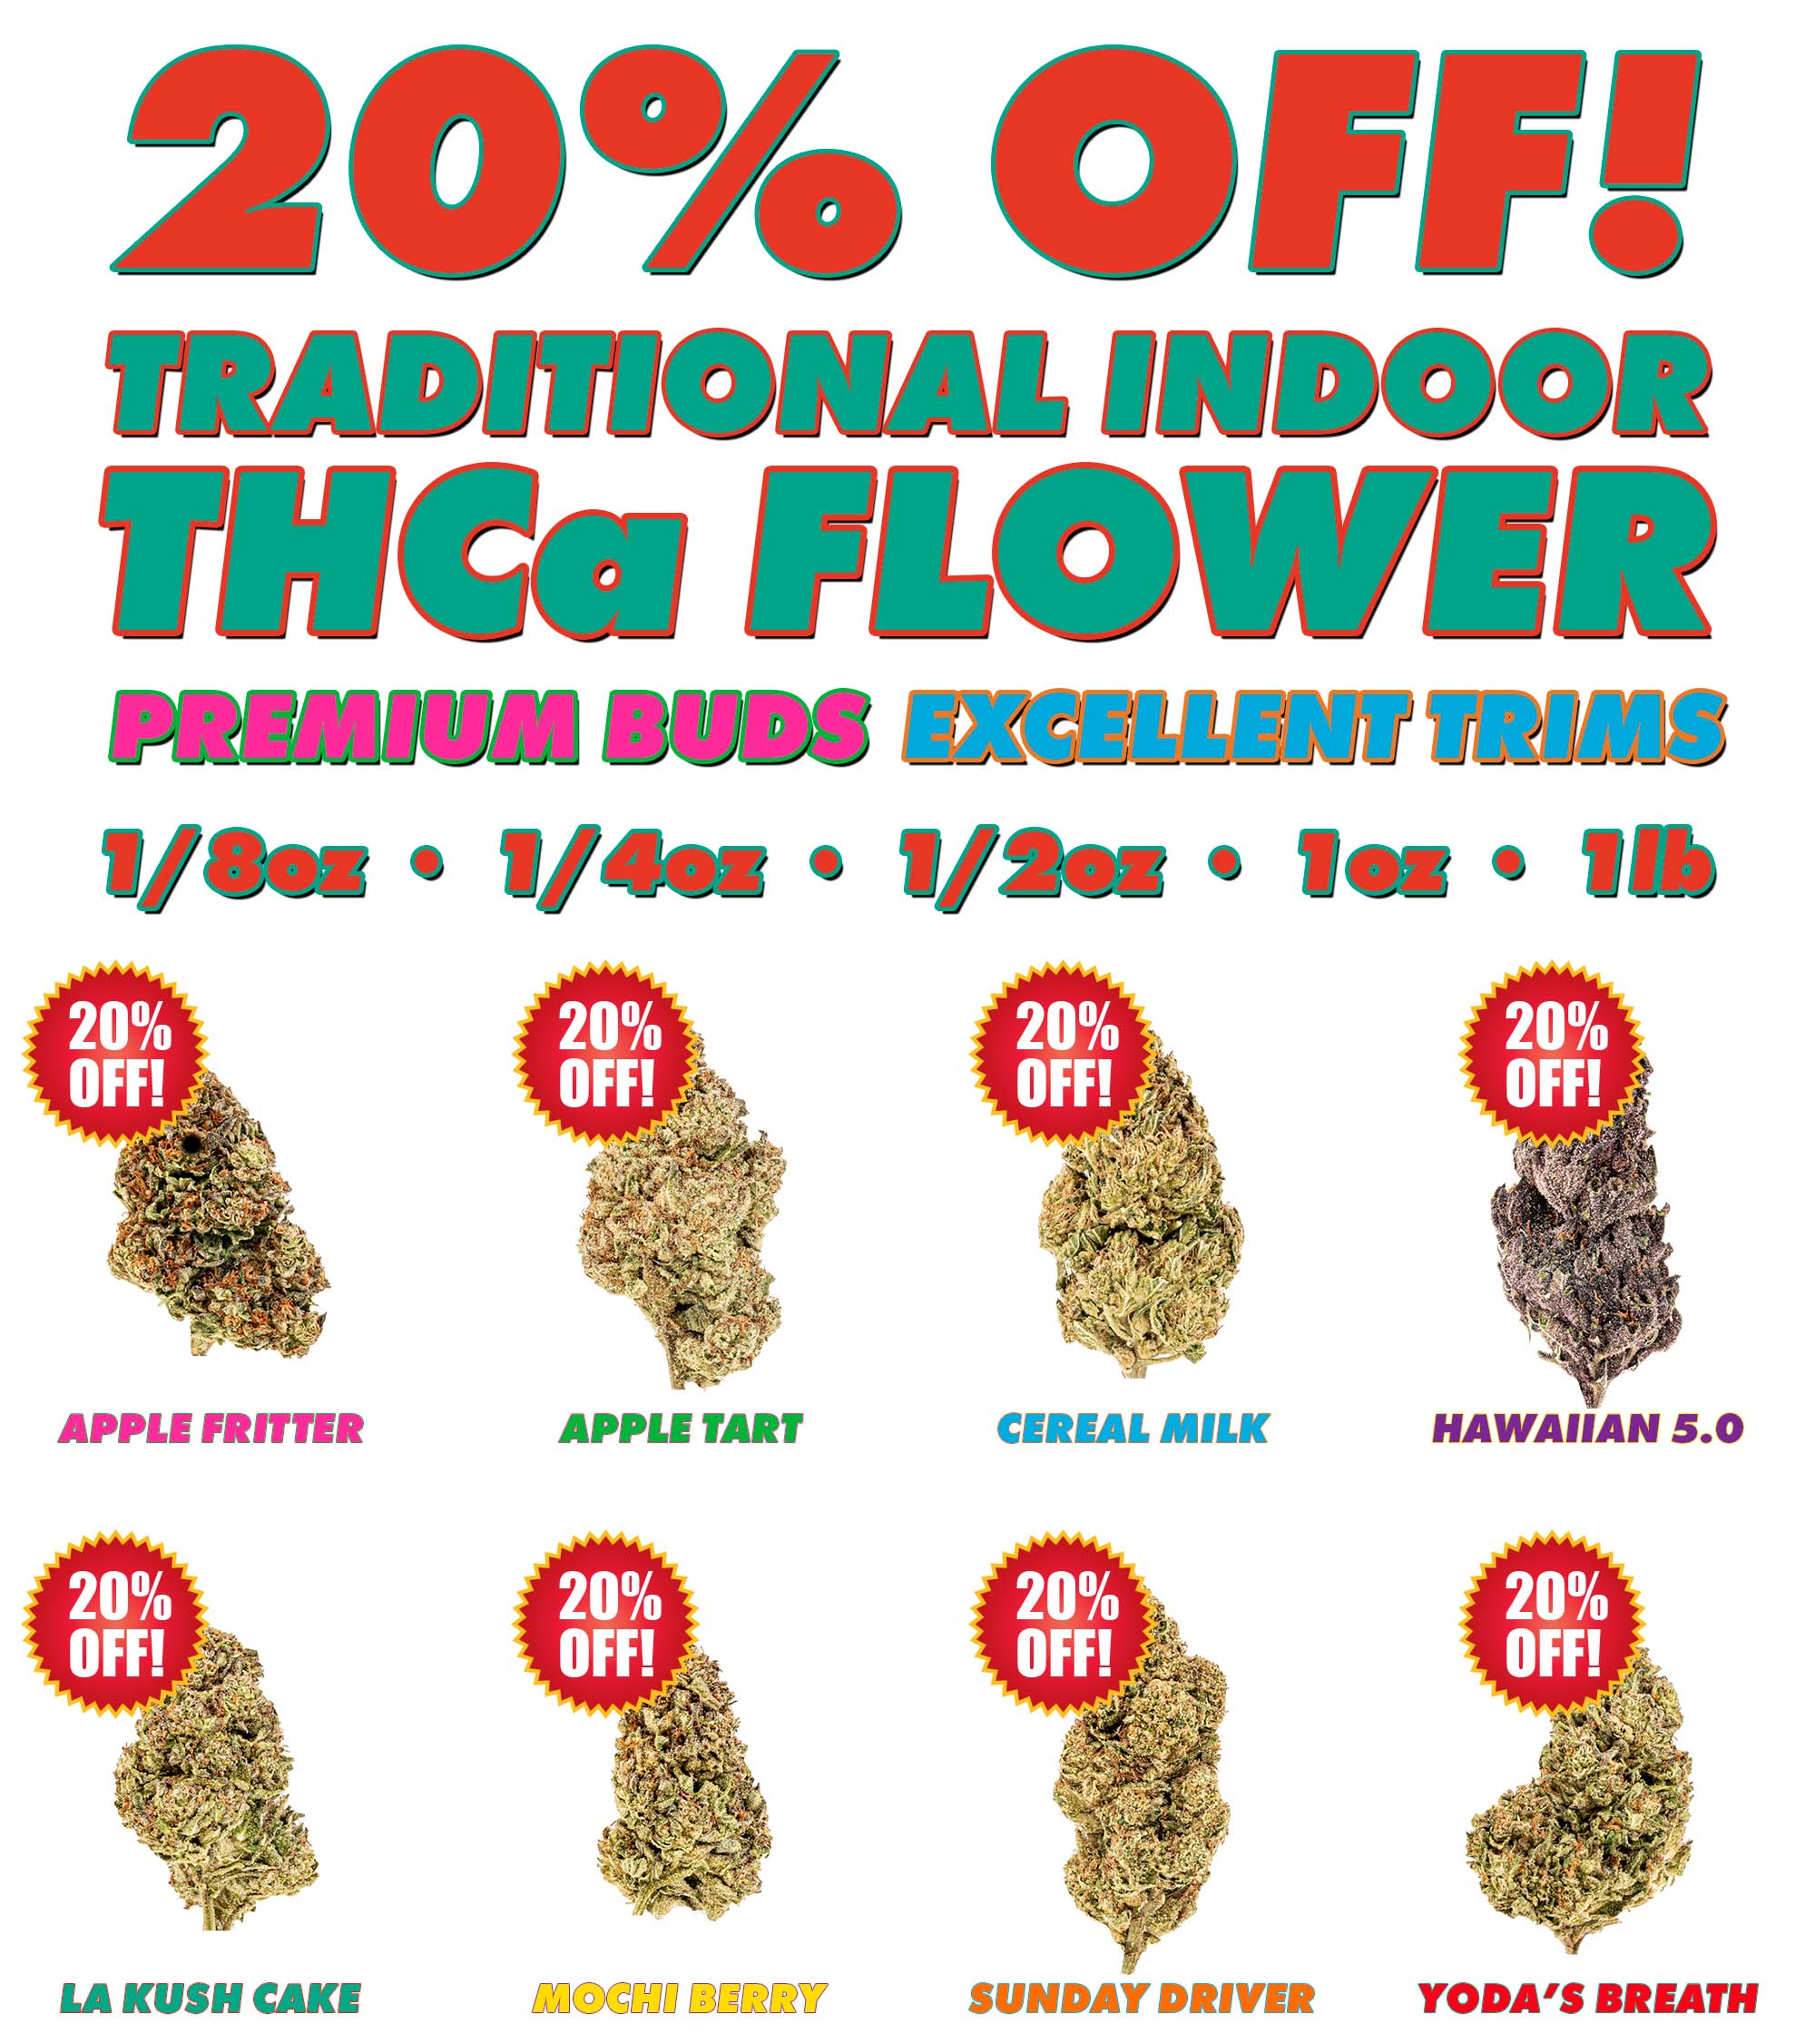 20% OFF TRADITIONAL THCA FLOWER